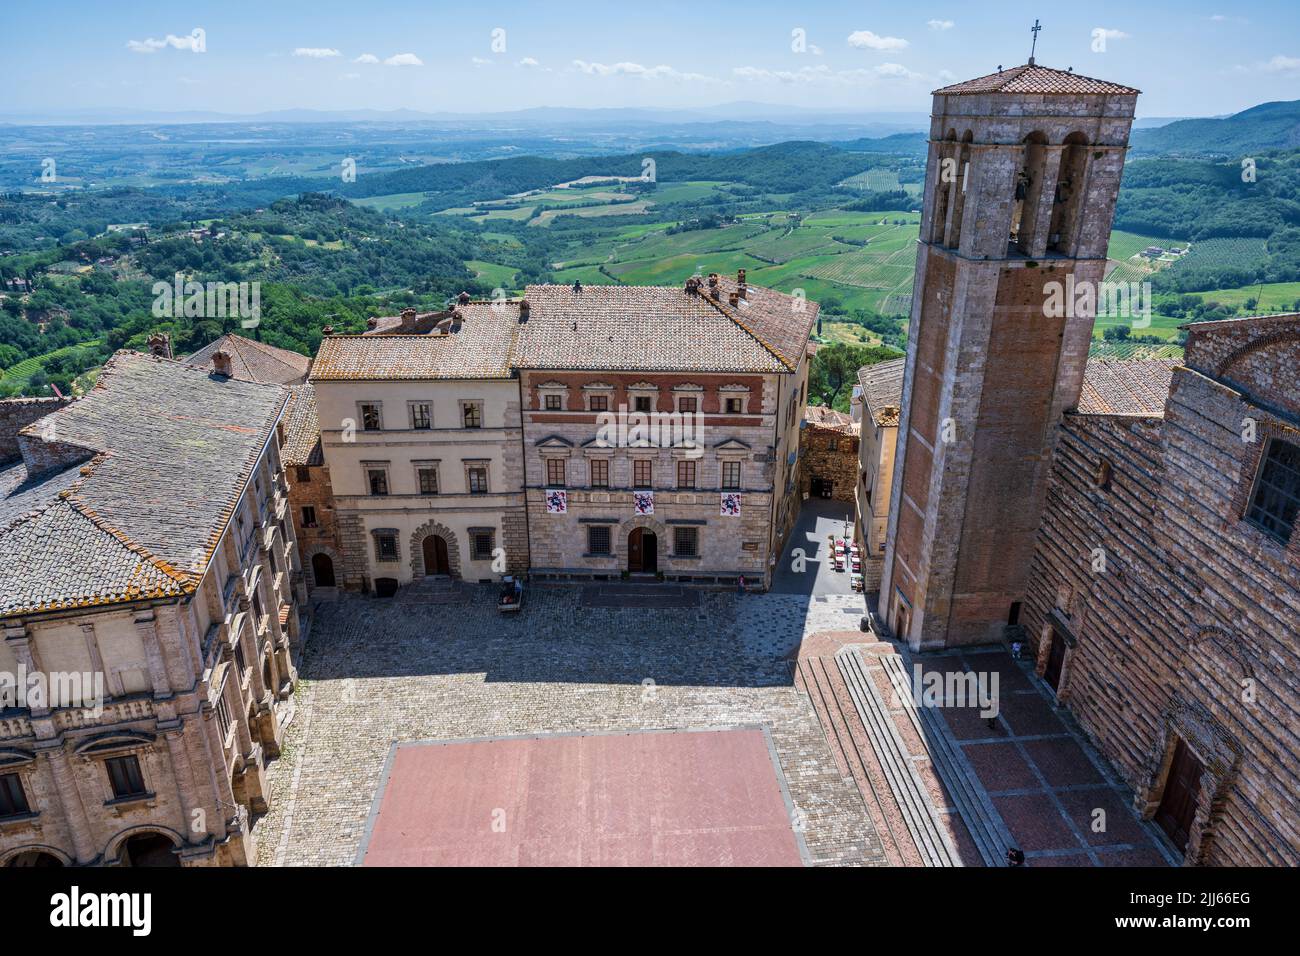 Elevated view of Piazza Grande from the tower of Palazzo Comunale in the hilltop town of Montepulciano in Tuscany, Italy Stock Photo